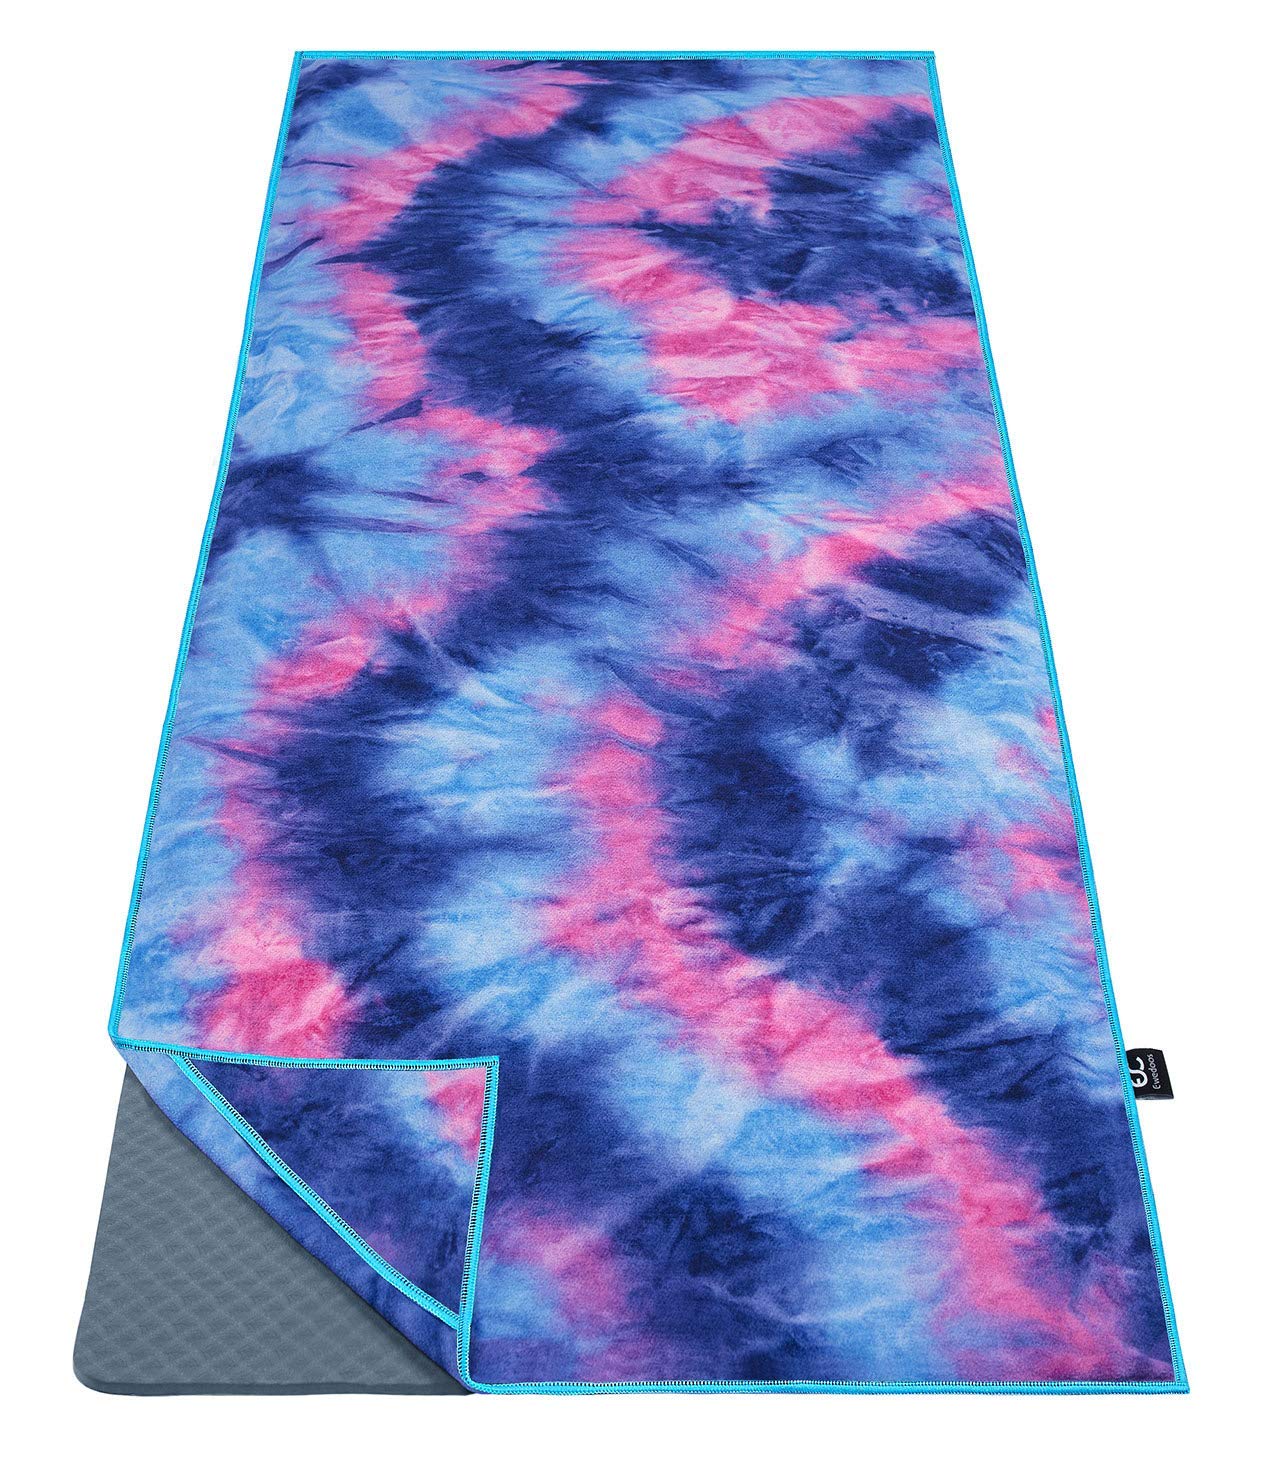 Ewedoos Yoga Towel with Anchor Fit Corners, Non Slip Yoga Towel, 100%  Microfiber, Super Soft, Sweat Absorbent, Ideal for Hot Yoga, Pilates and  Workout. Blue & Pink Tie Dye 72 X 26